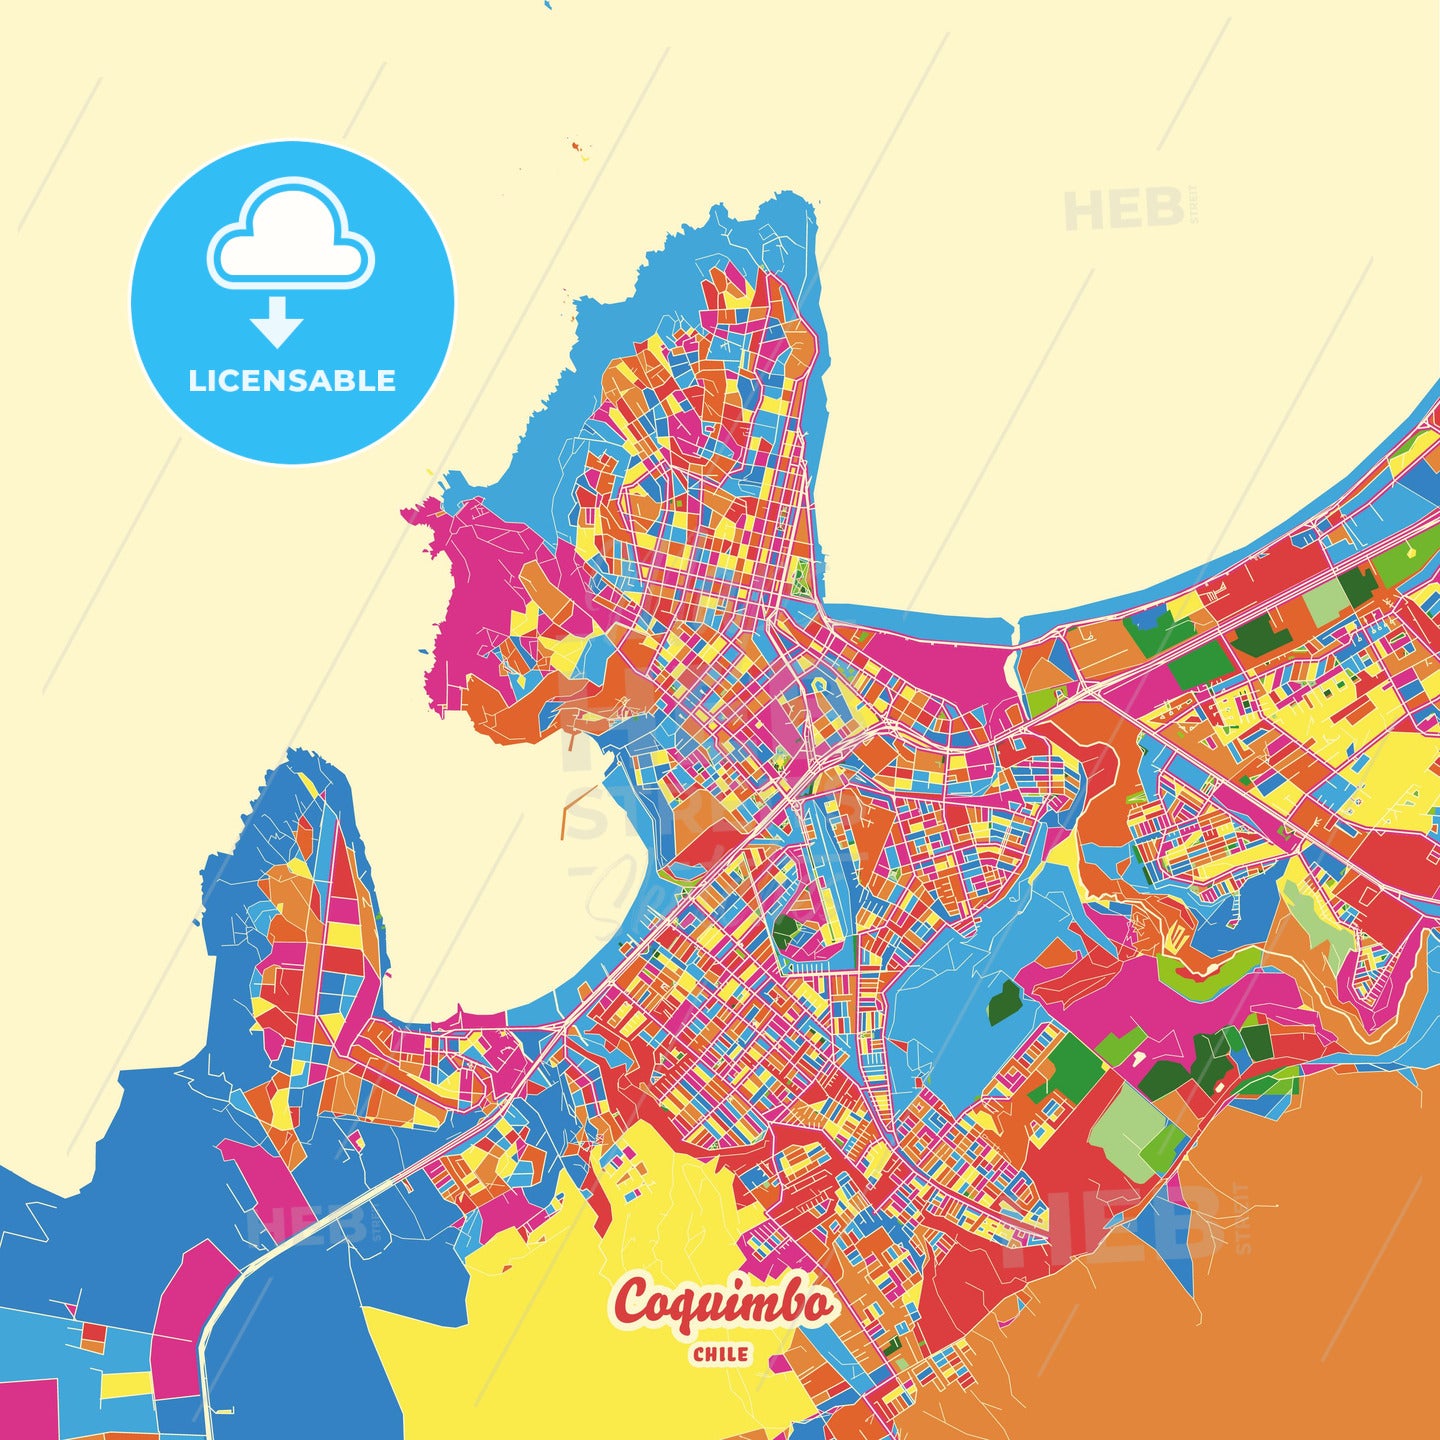 Coquimbo, Chile Crazy Colorful Street Map Poster Template - HEBSTREITS Sketches